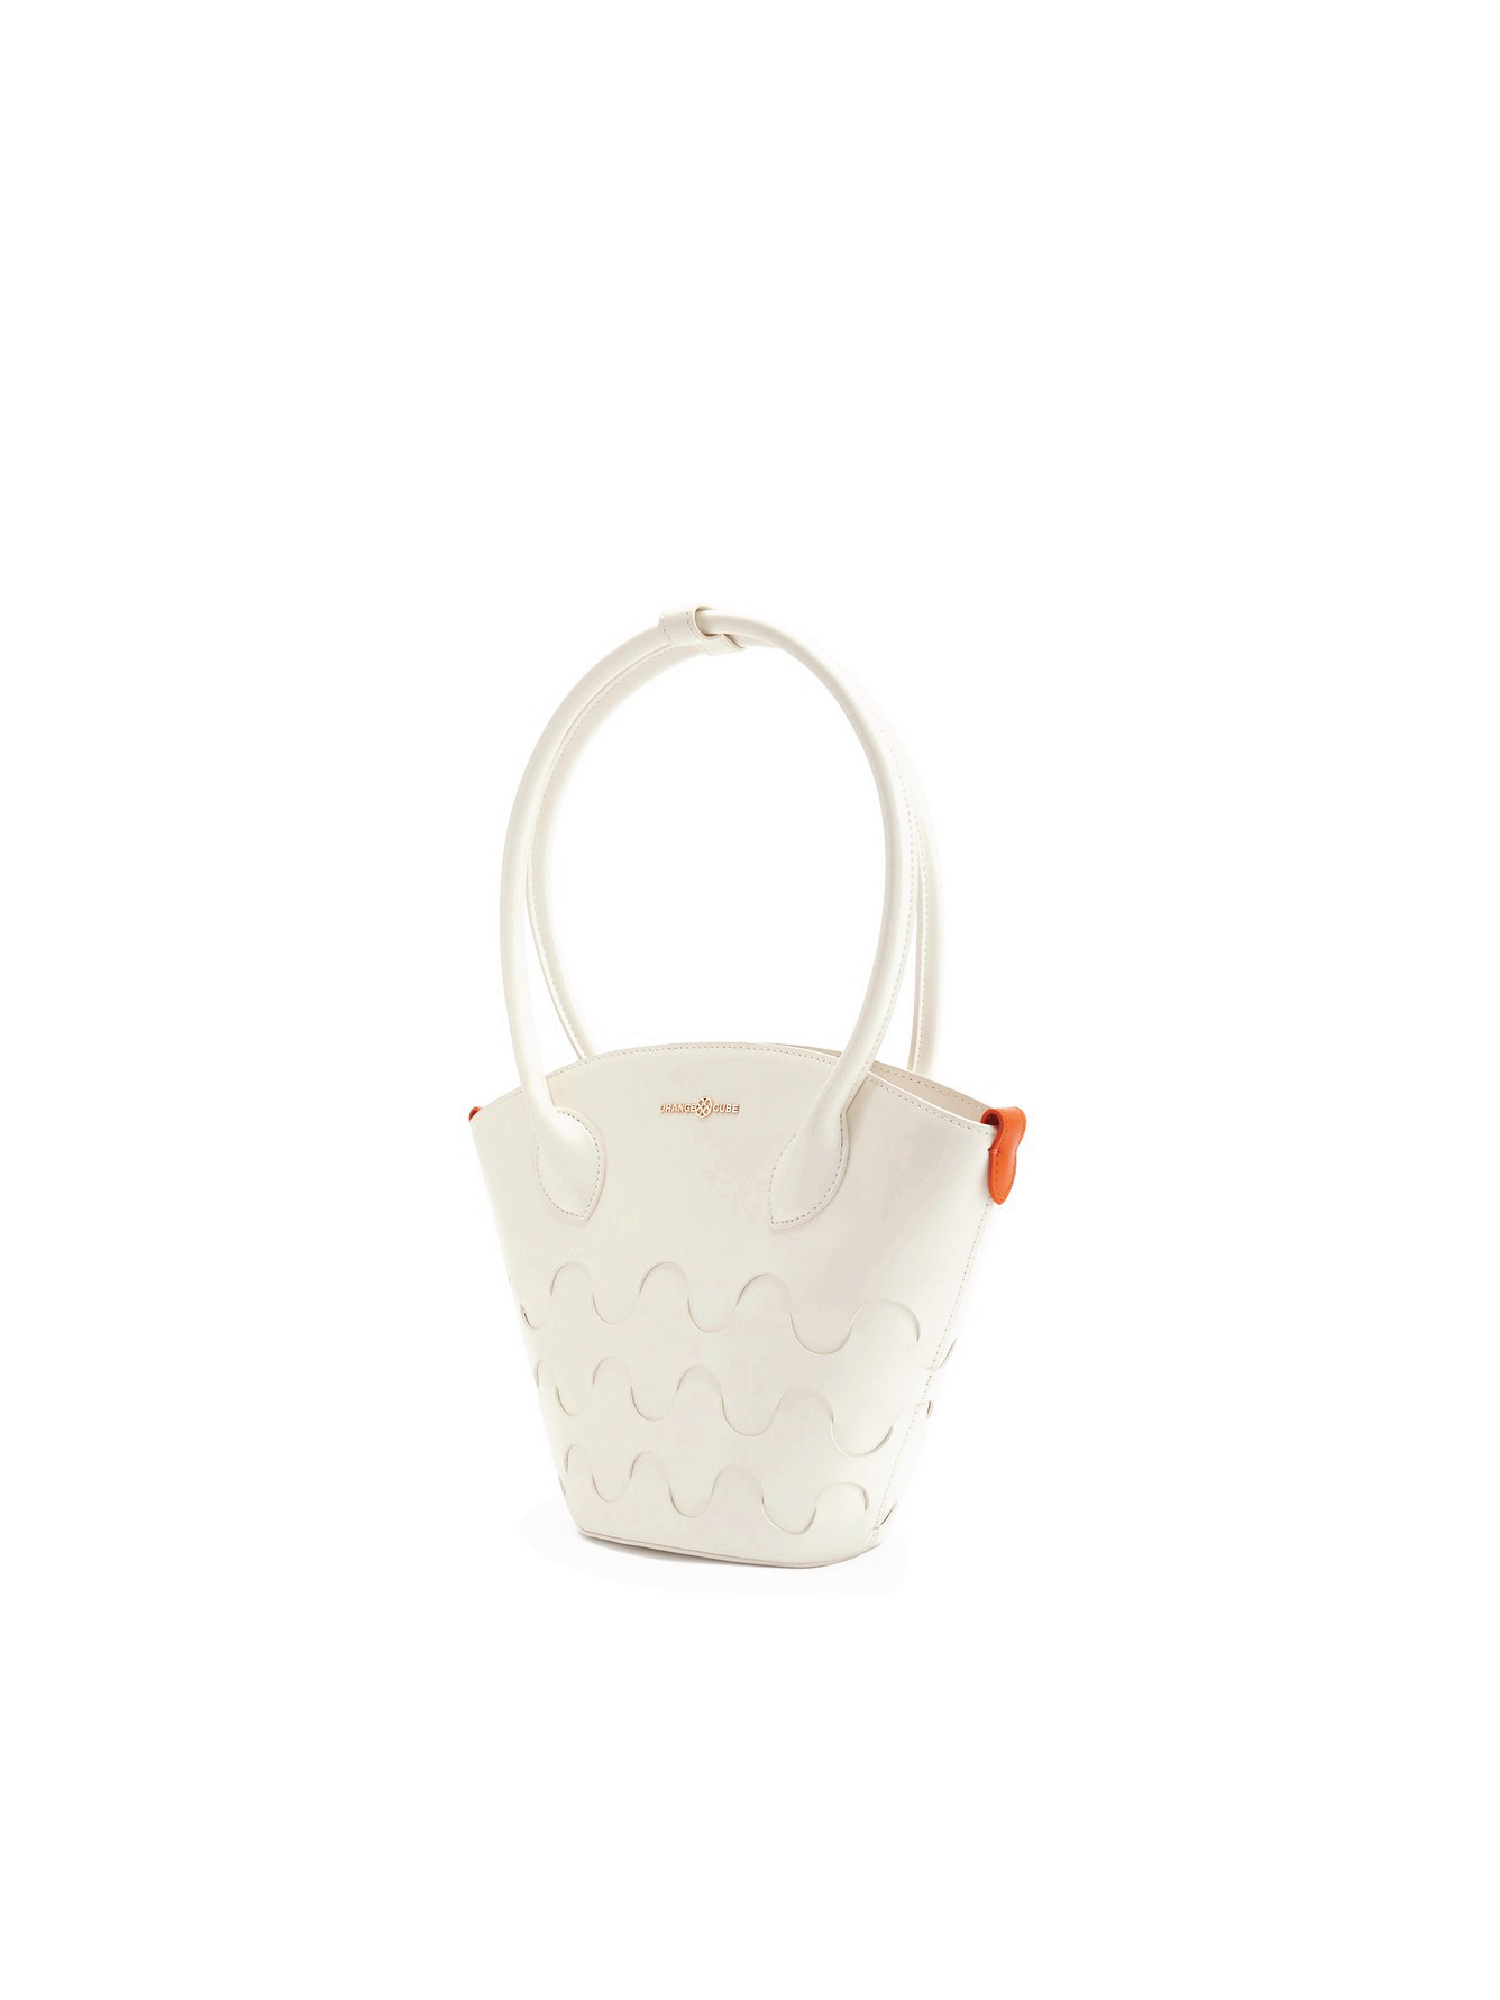 Quilted Impressions Wavy Tote Bag - White (Small) - Orange Cube